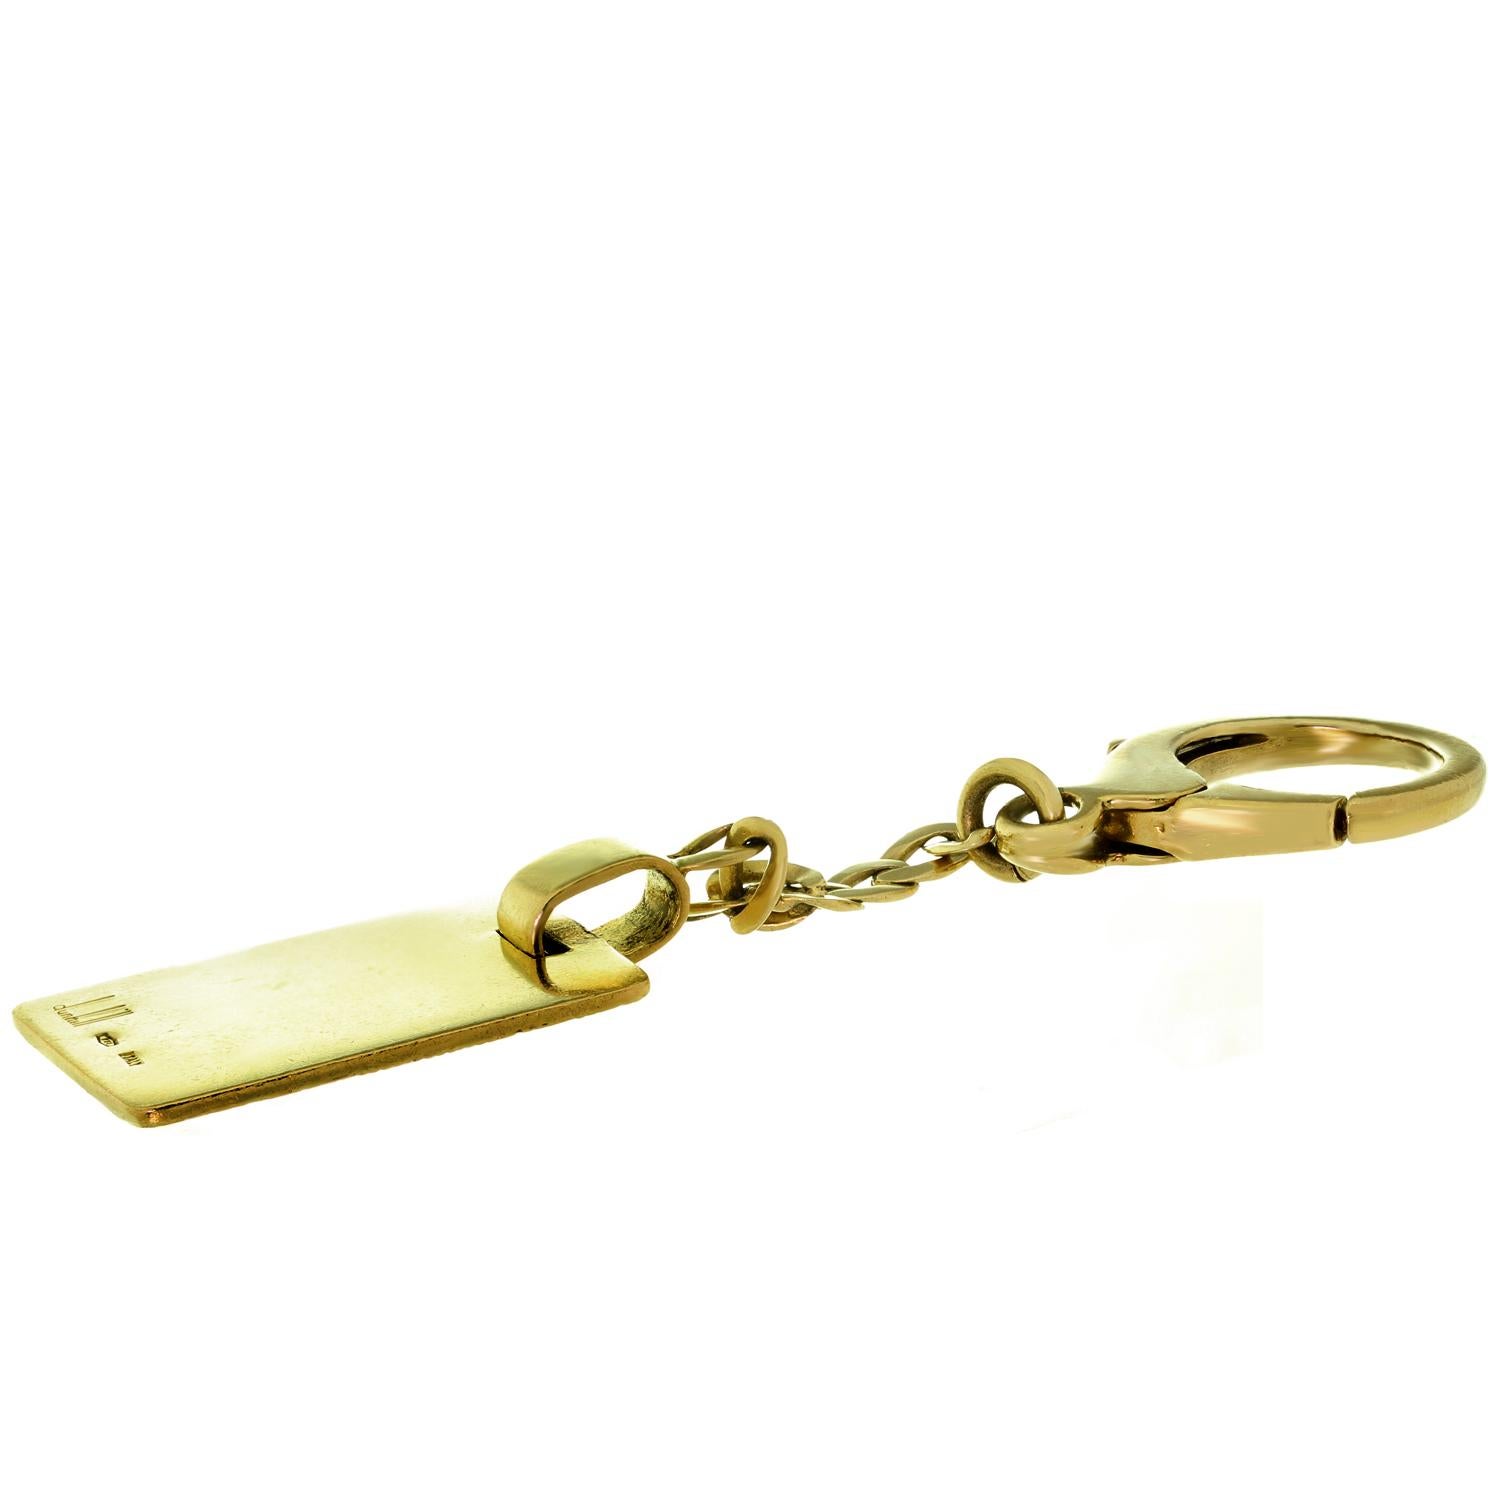 This classic Dunhill keychain features a textured rectangular design crafted in 18k yellow gold. Made in Italy circa 1990s. Measurements: 3.11